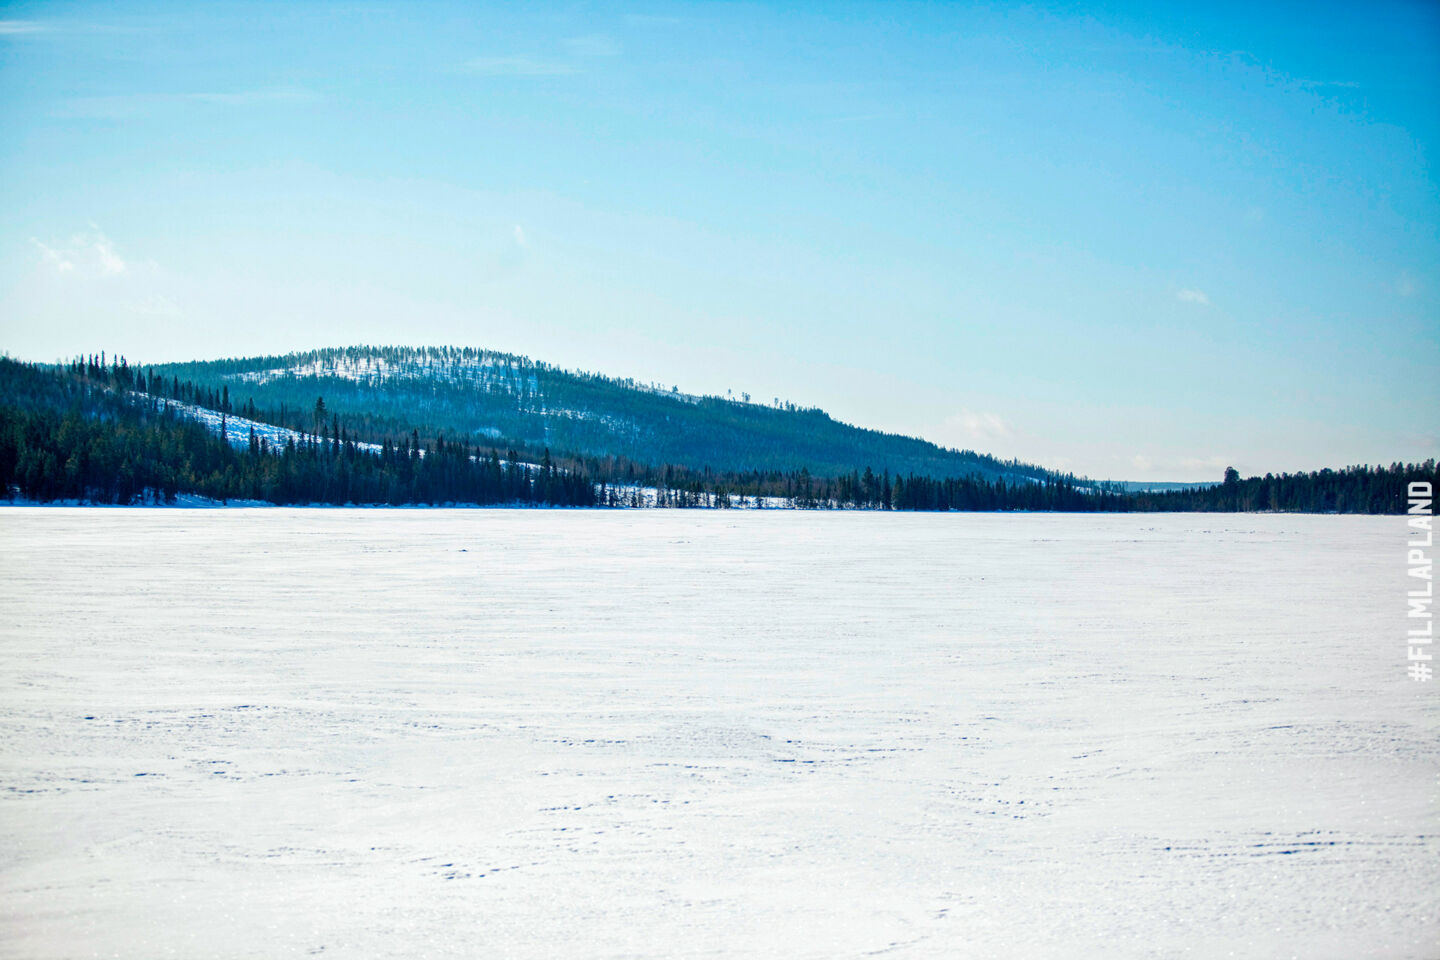 A frozen lake covered in snow, a Finnish Lapland filming location